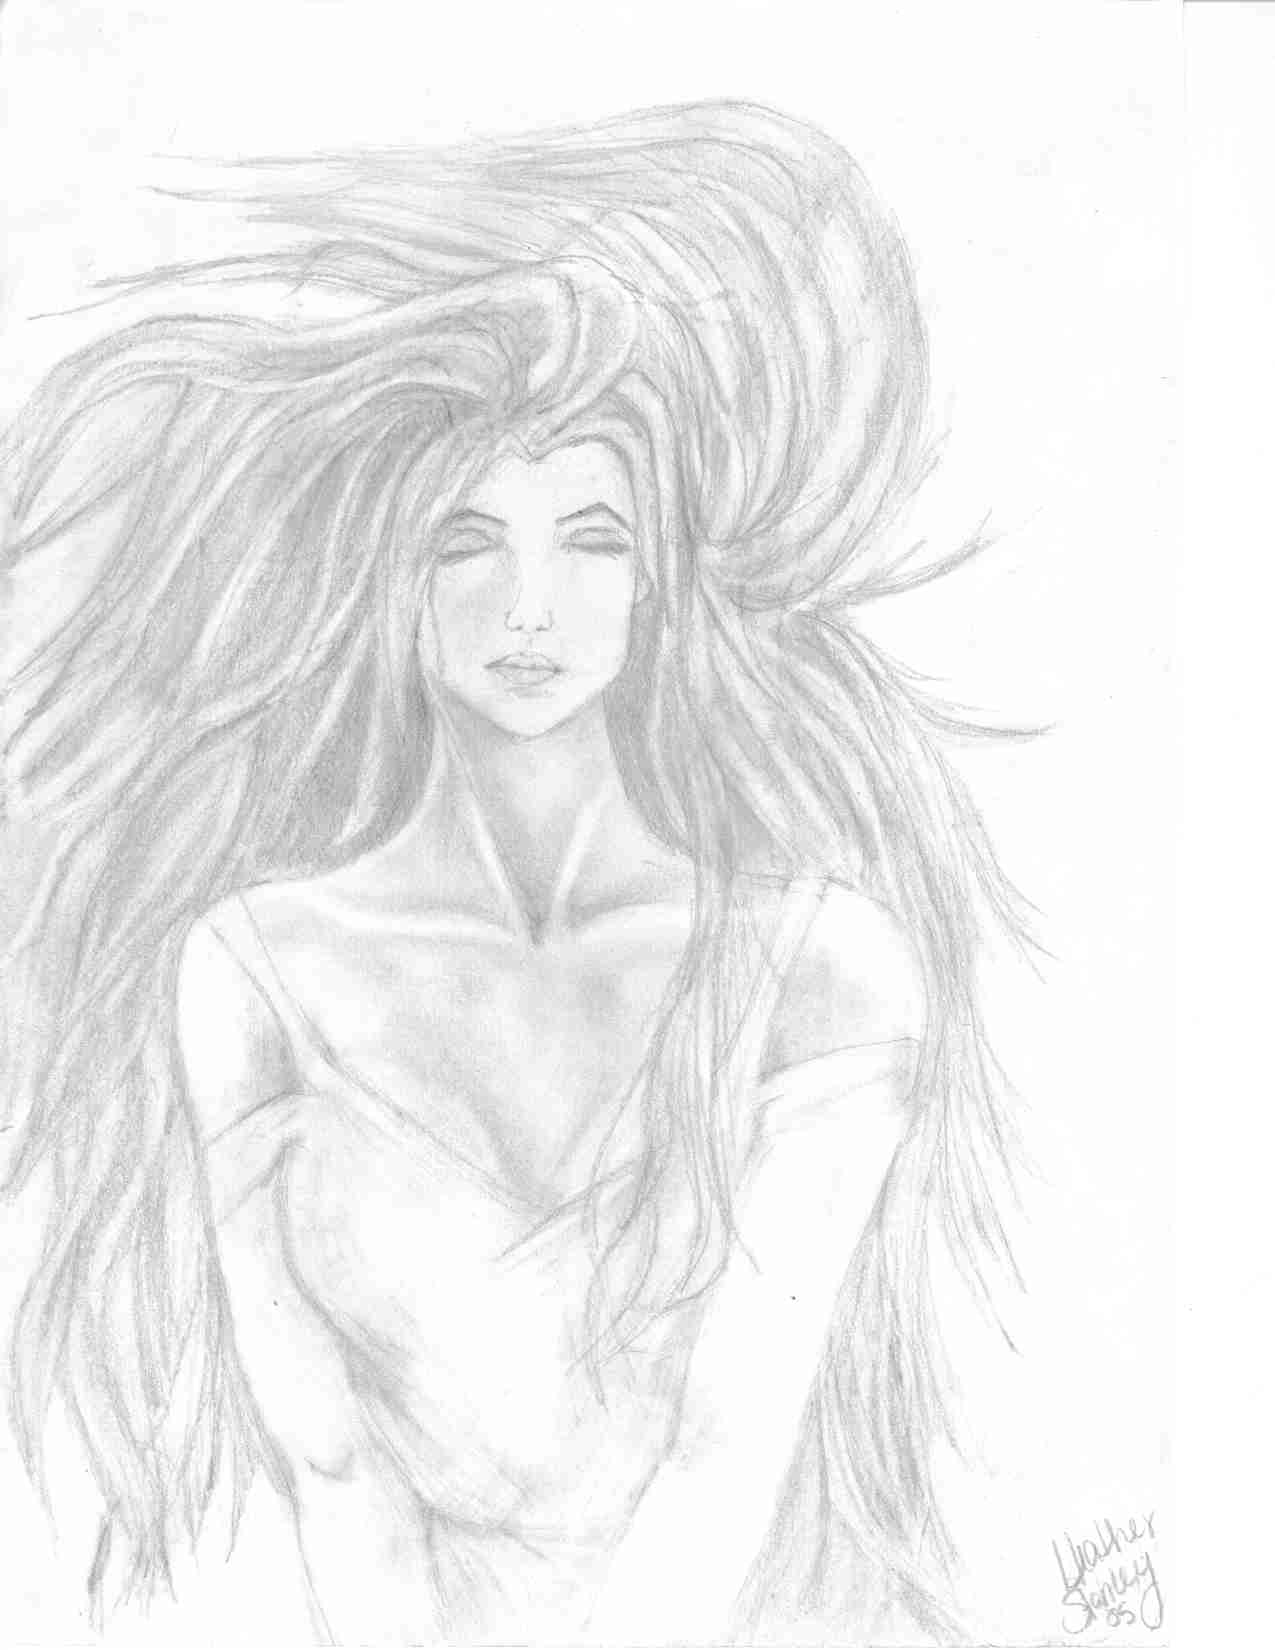 Woman in the wind (pencil drawing/realistic) by Heatherenie